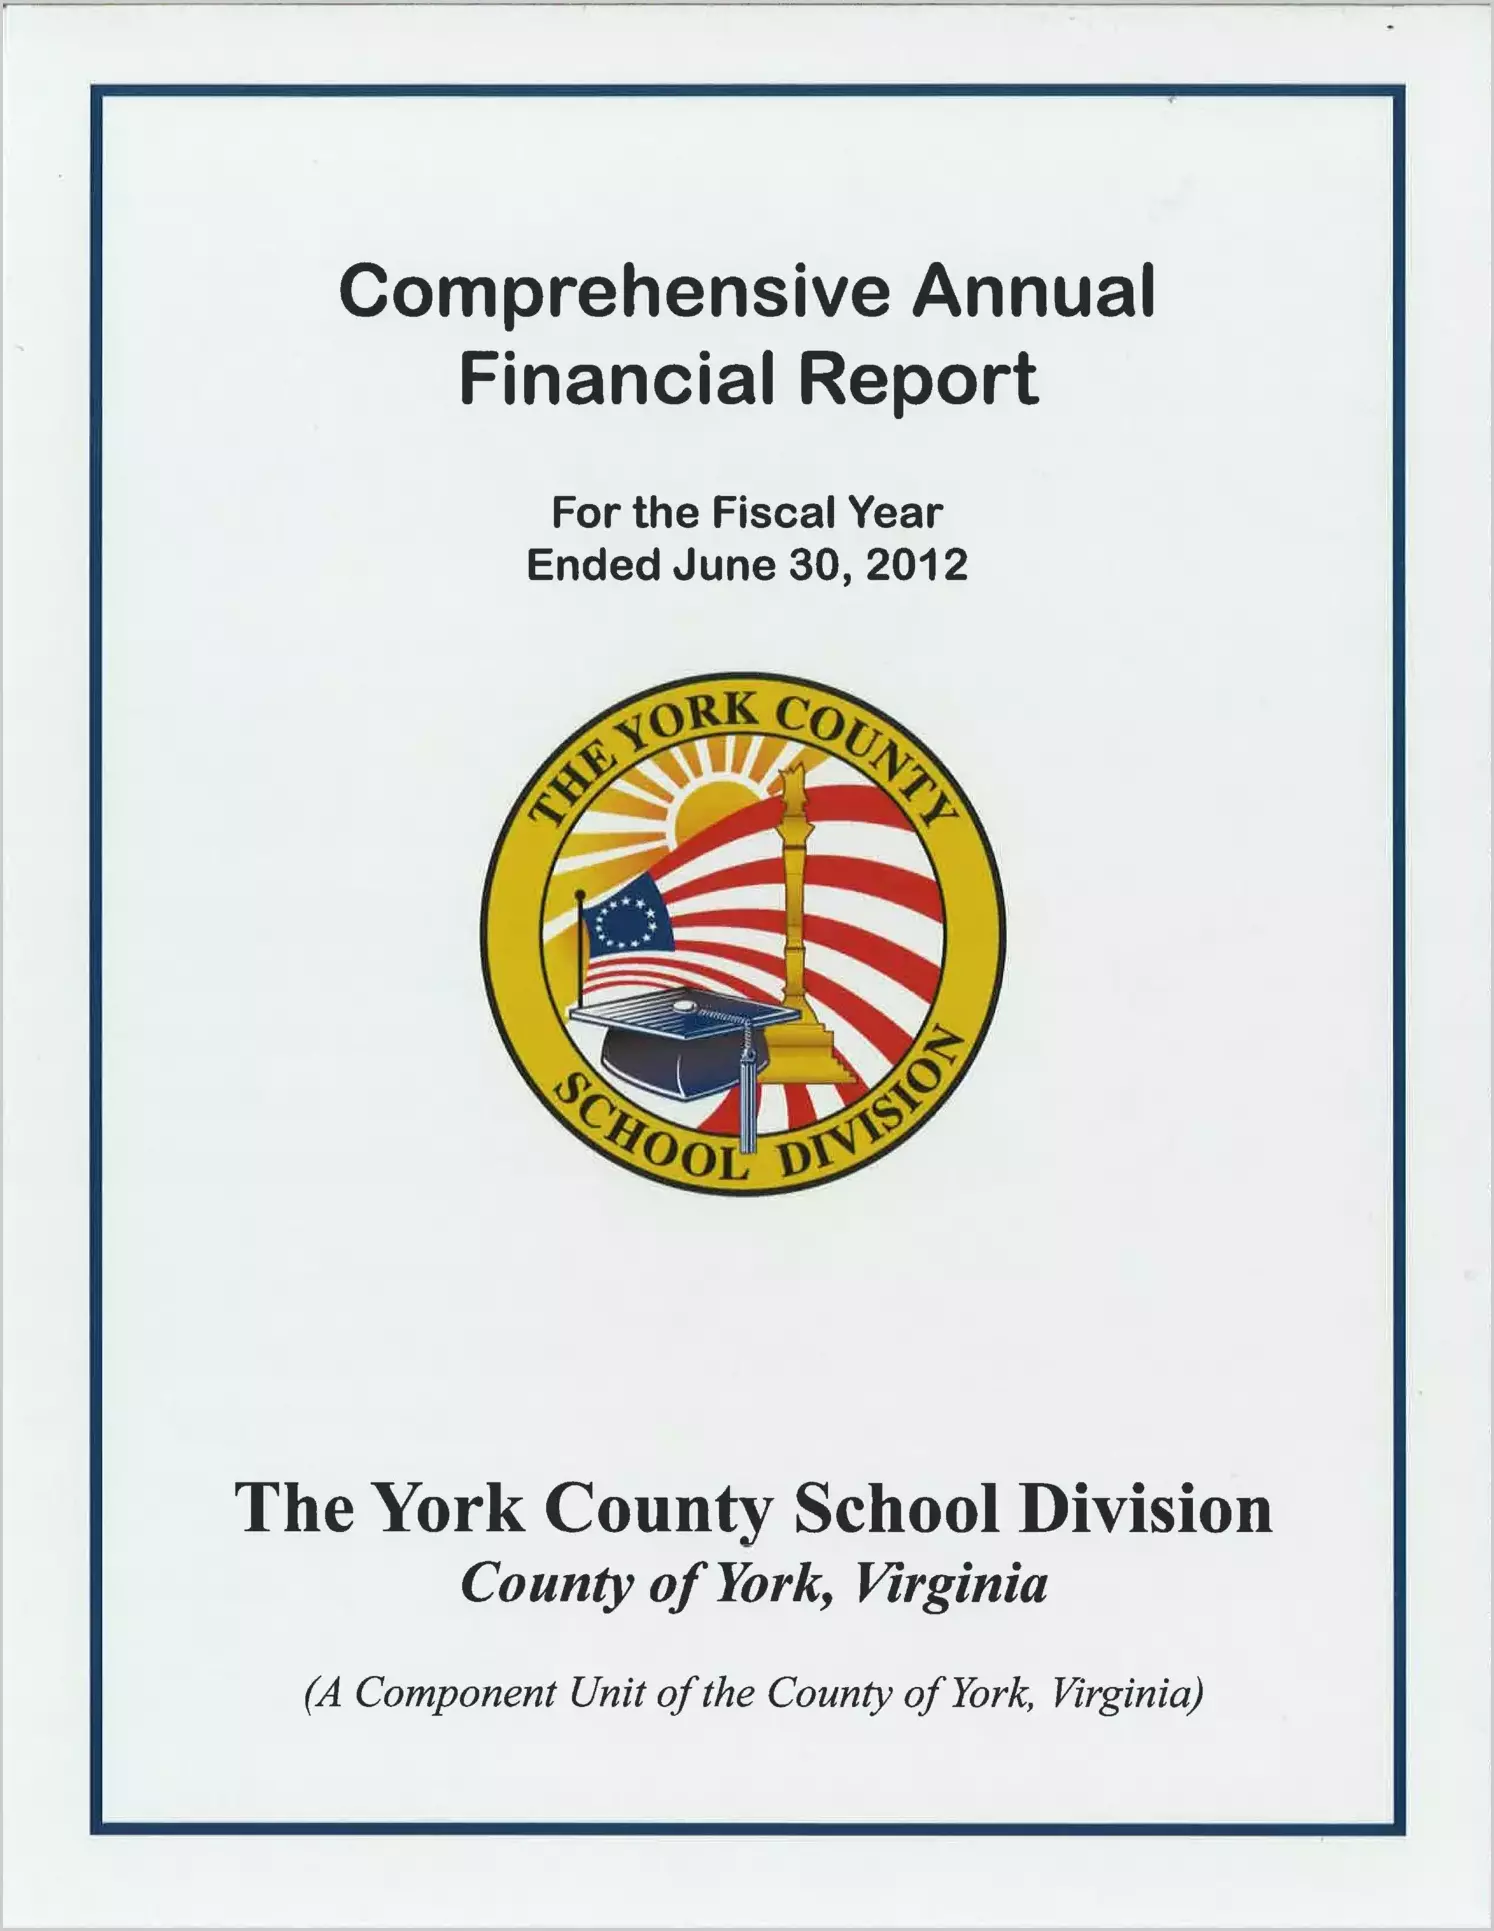 2012 Public Schools Annual Financial Report for County of York